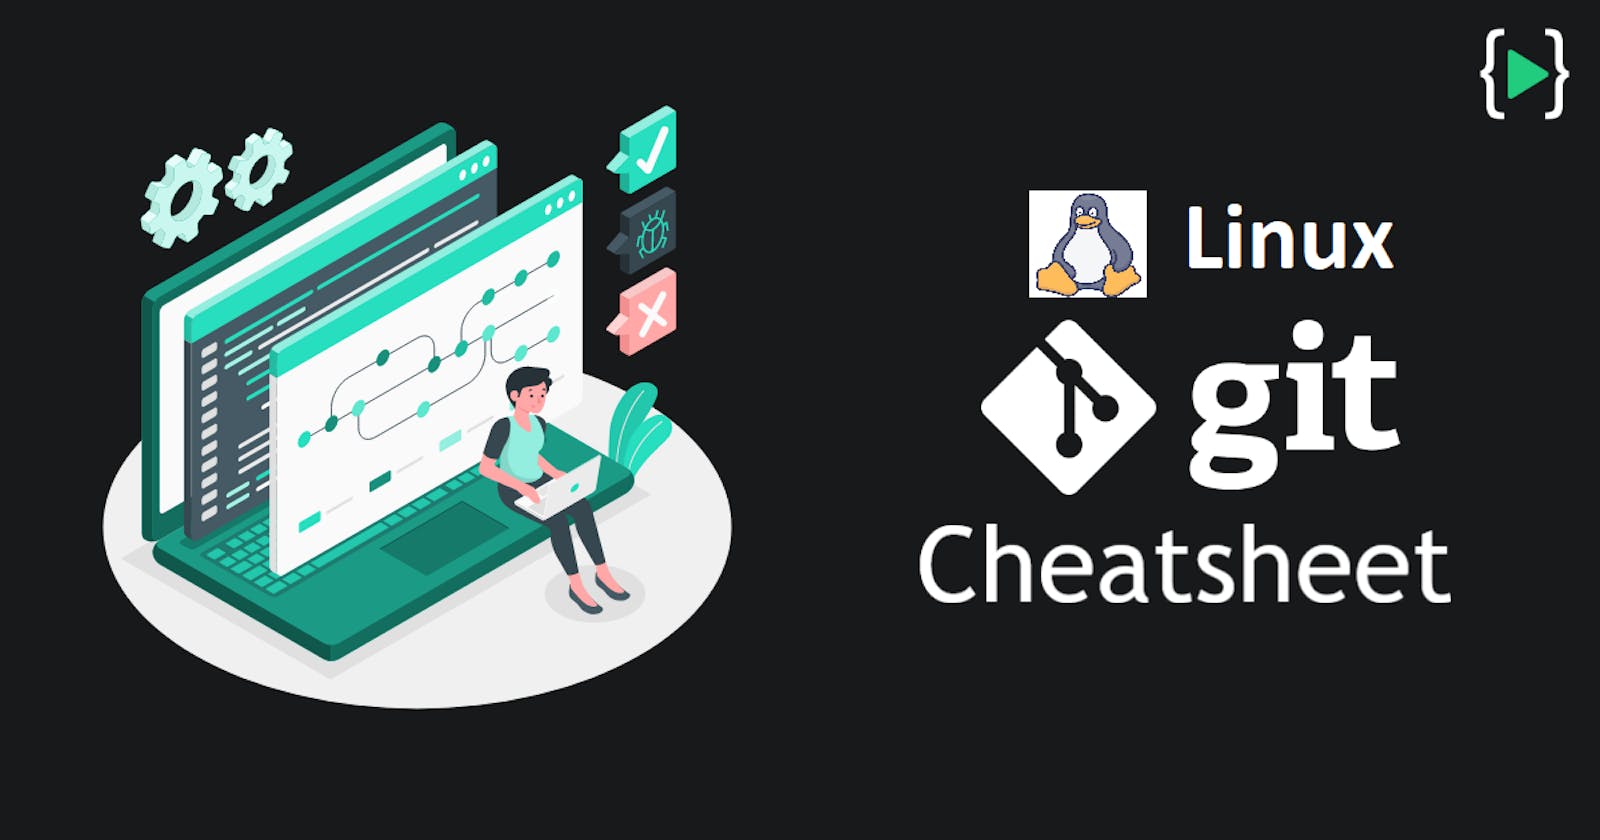 Linux  and Git Cheat Sheet